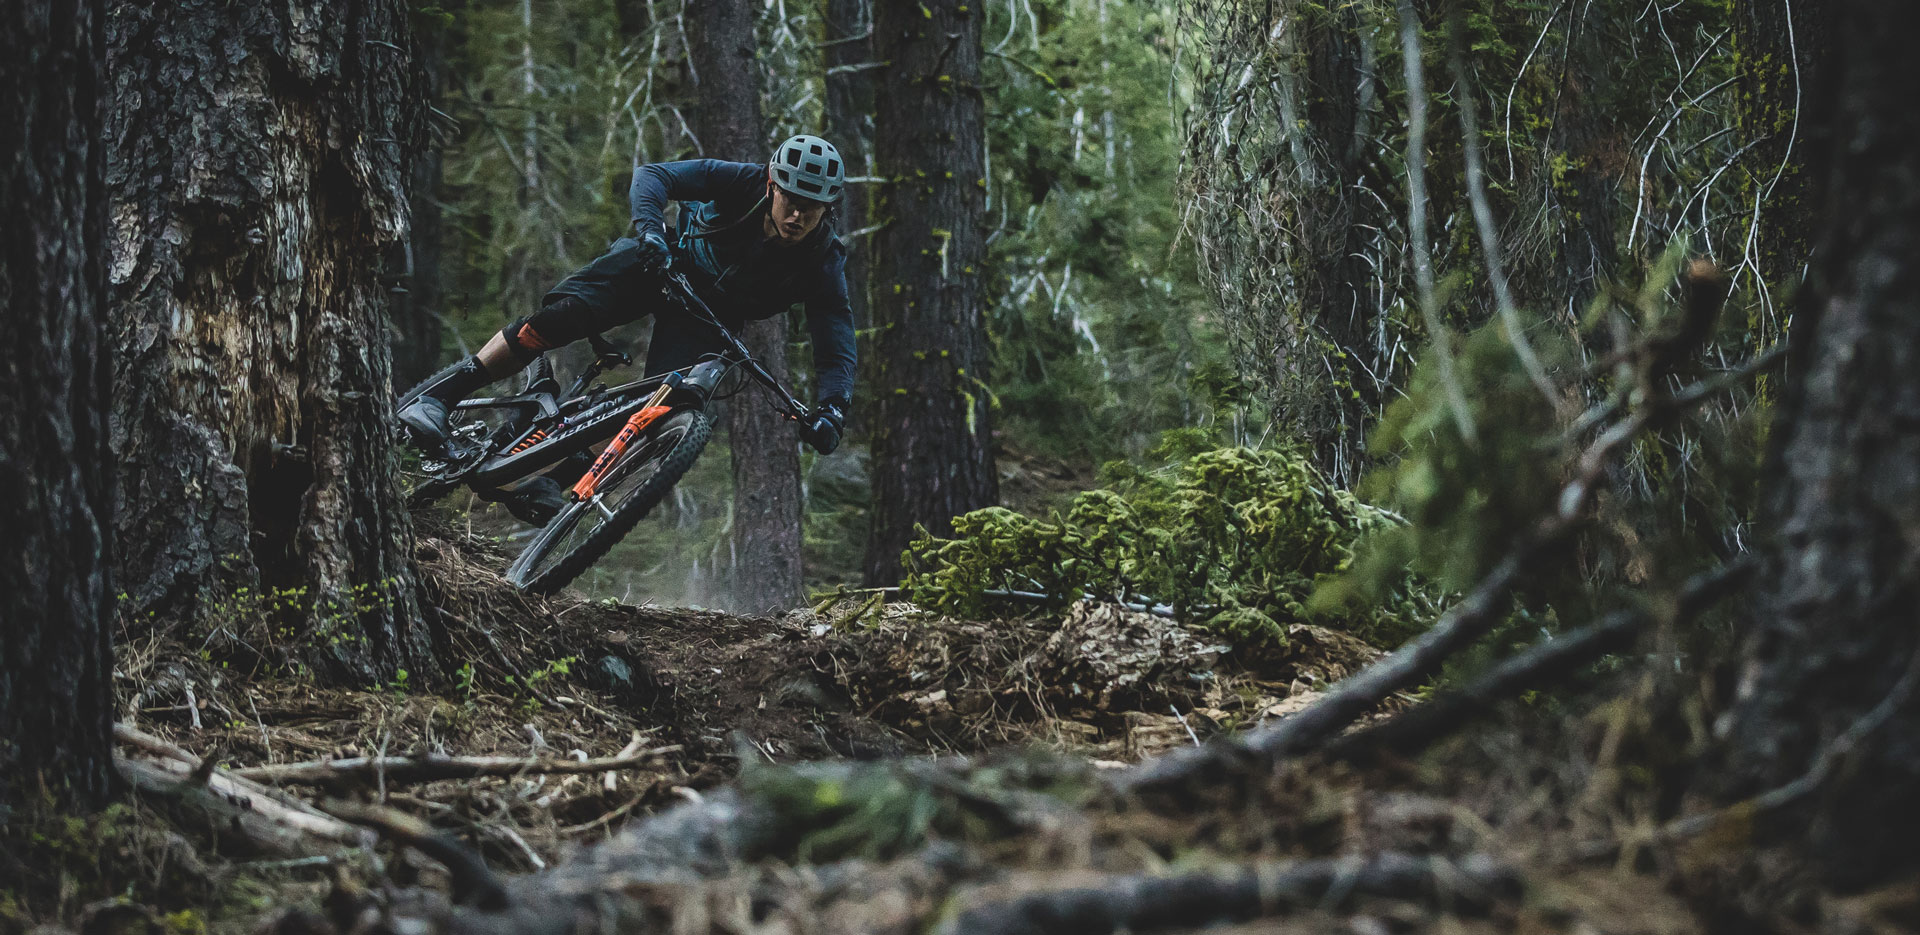 Marco’s home turf is riddled with remarkable trails. He puts his new Transition Sentinel 29er race bike to work. Photo by Ryan Cleek